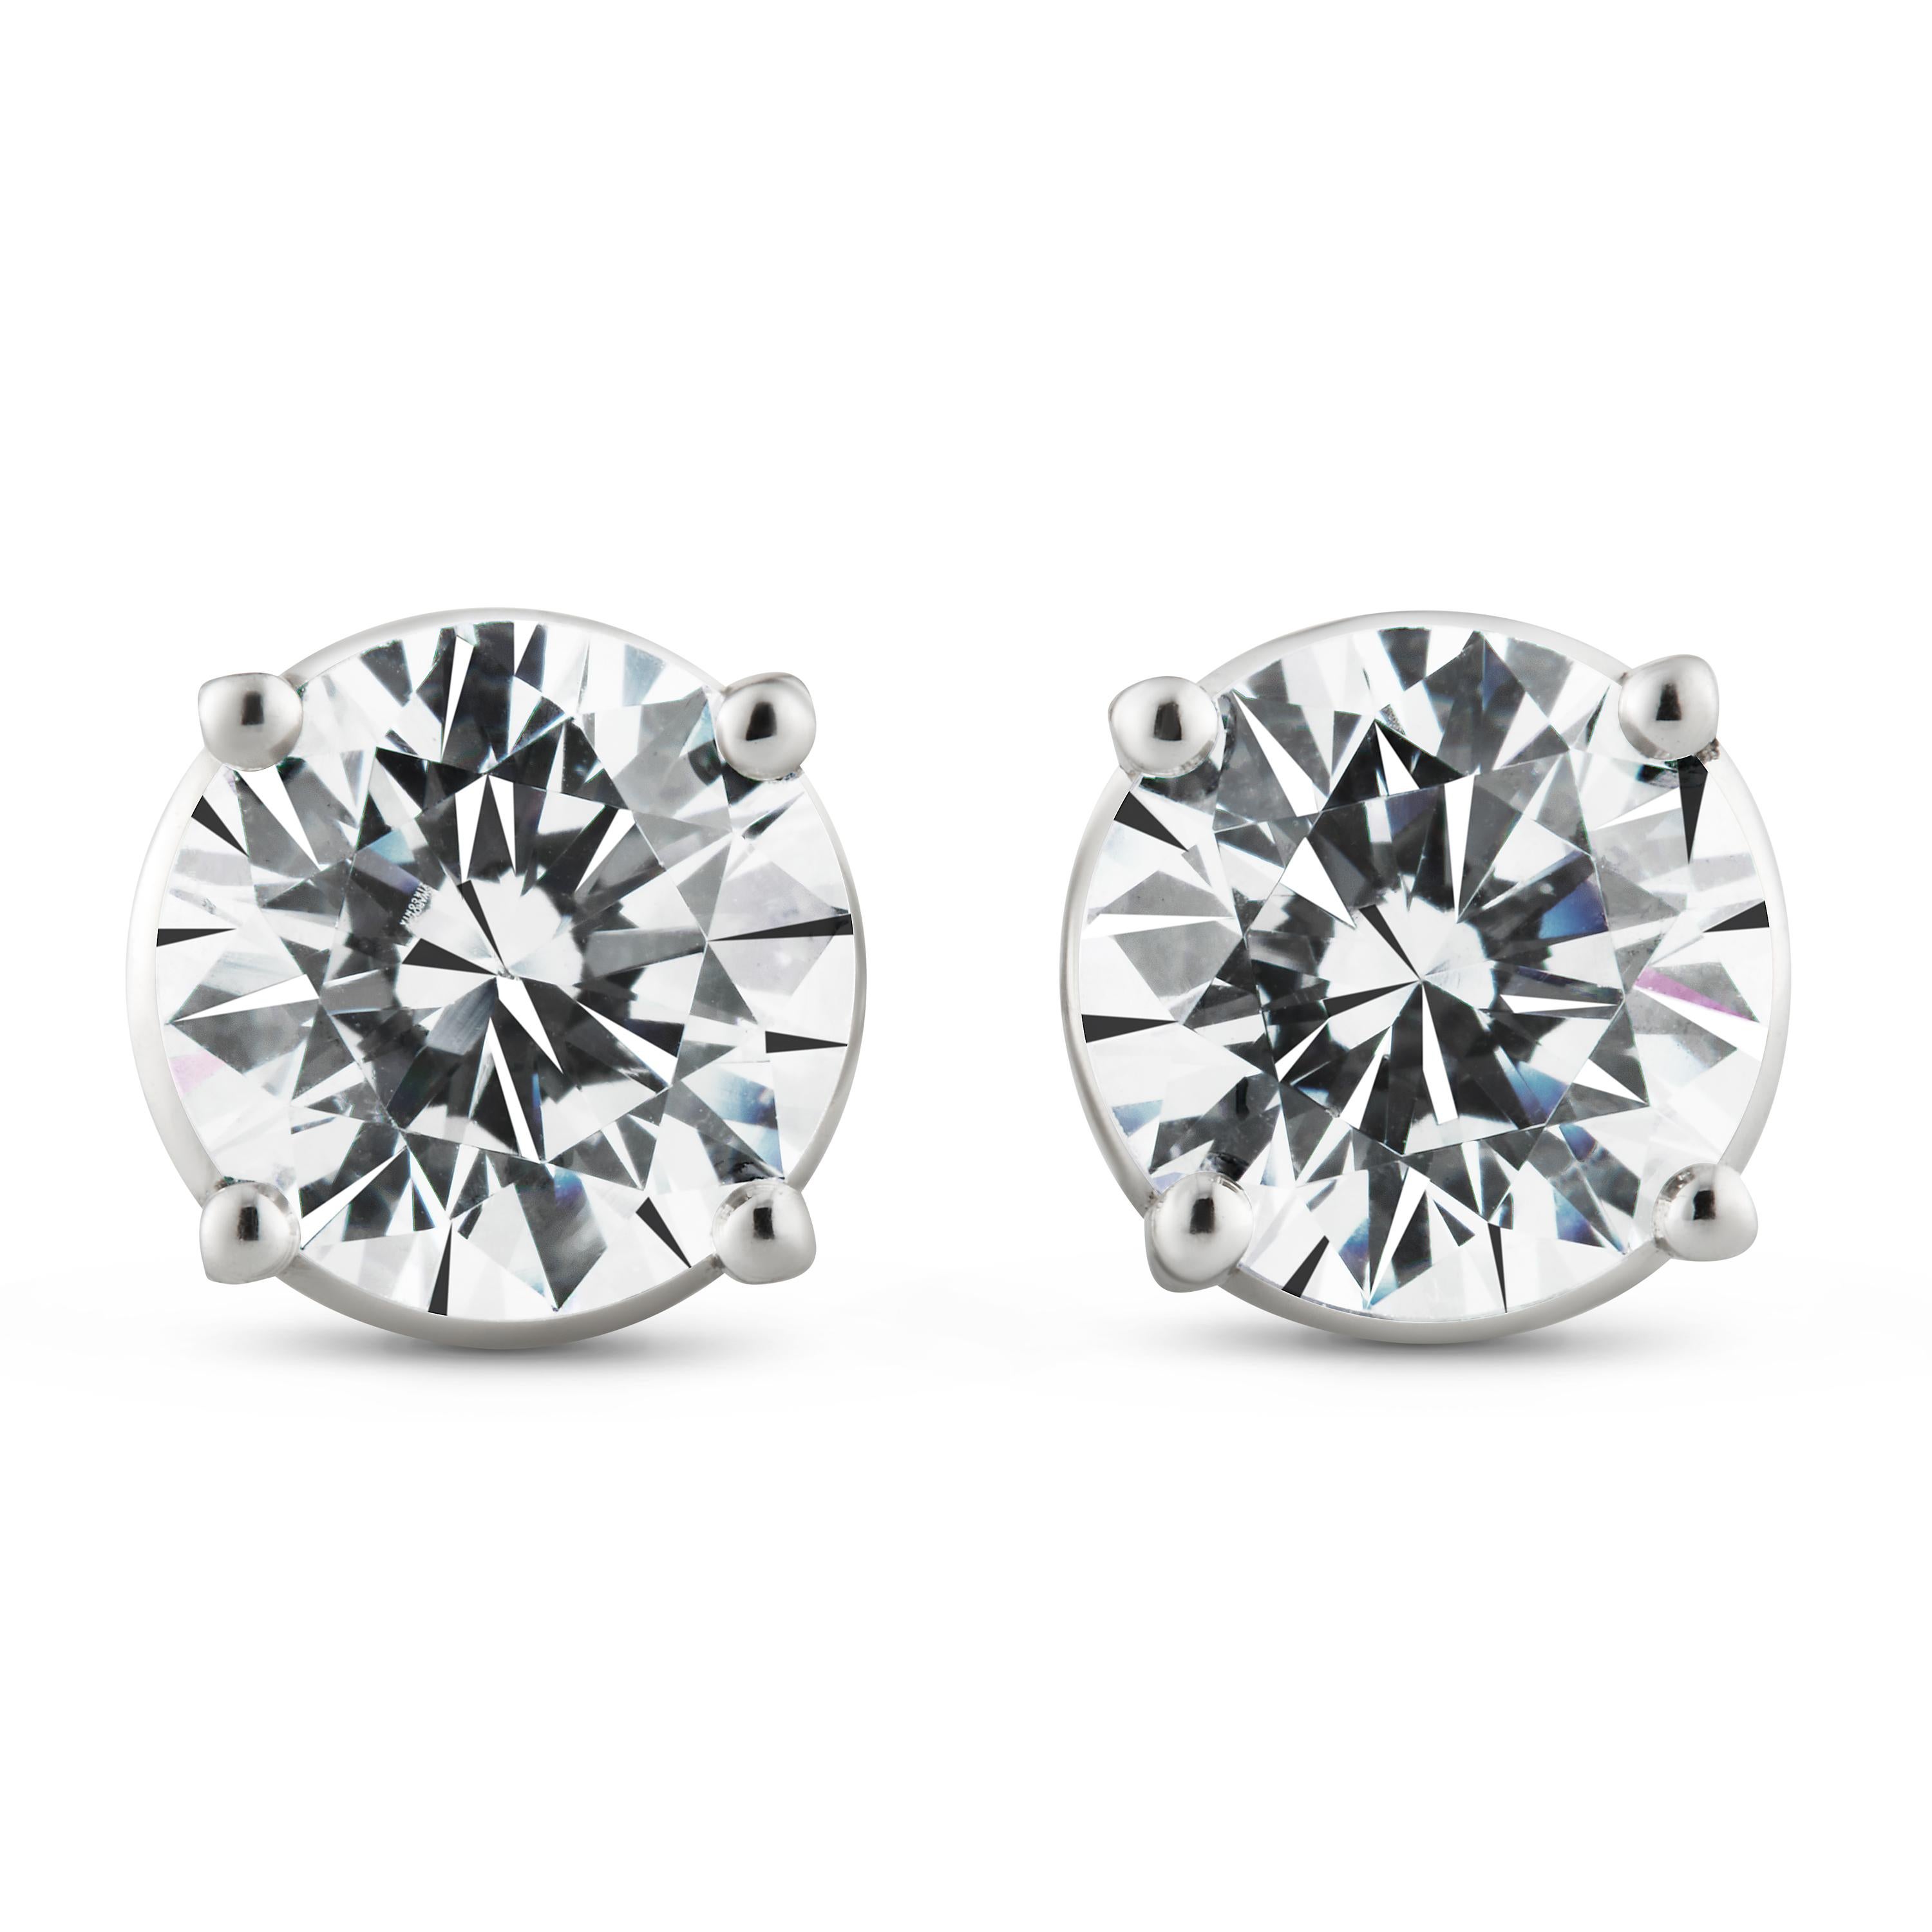 The No.1 Solitaire ear studs with a total weight of 2 carats are designed to maximise the brilliance and luminosity of the diamonds. 
Our distinctive halo is carefully engineered to elevate the diamond, emphasizing its size while strengthening and